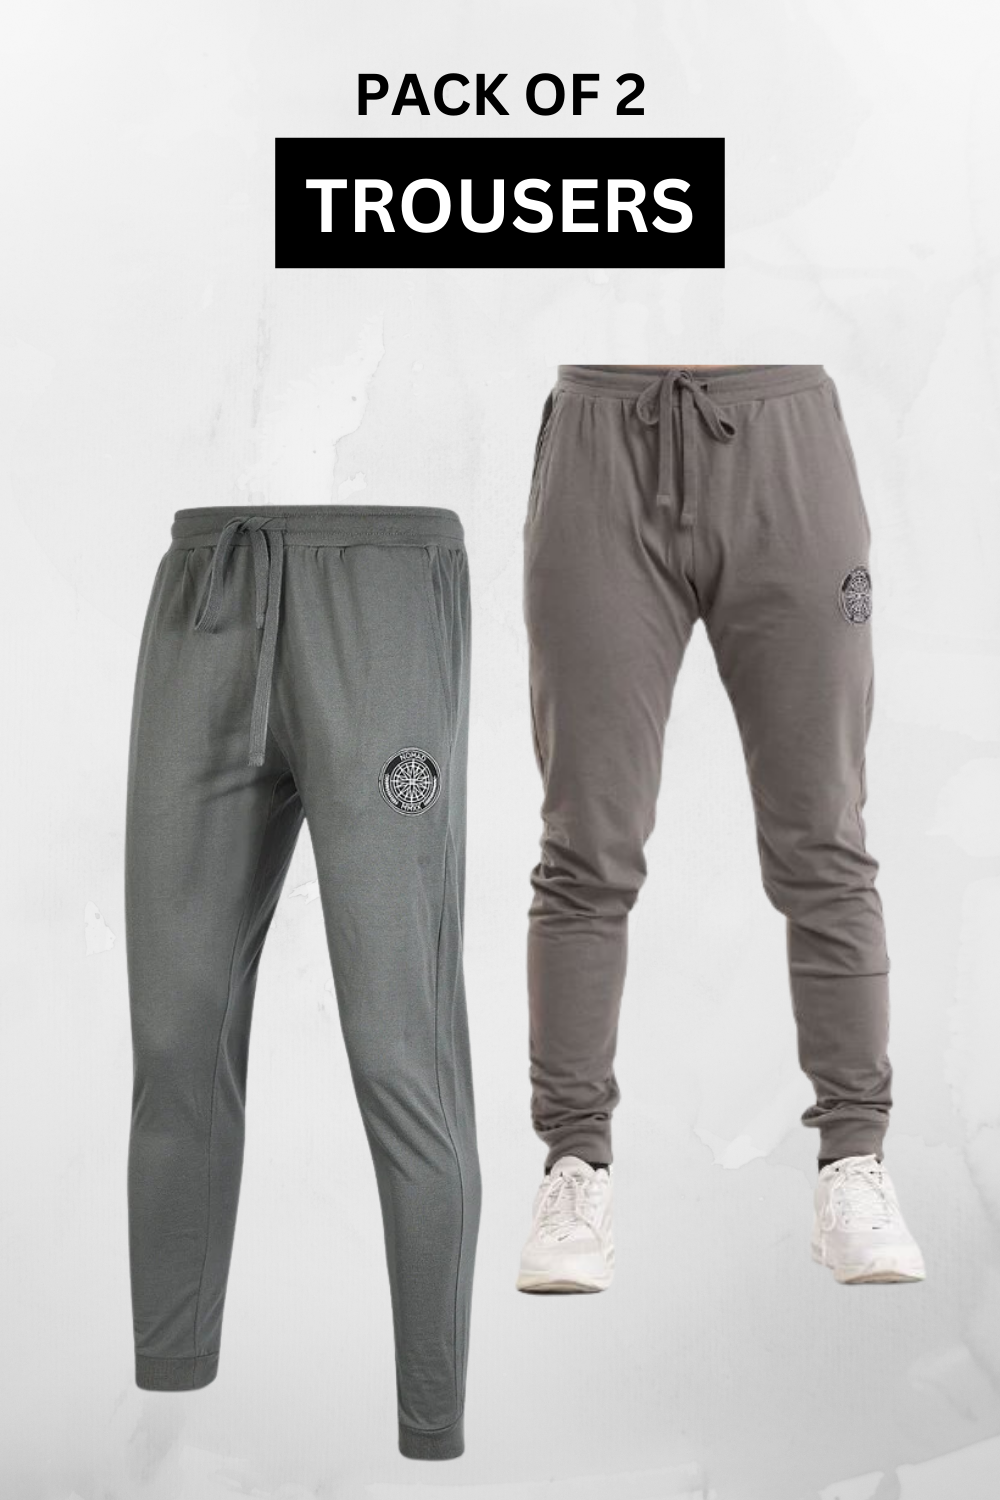 PACK OF 2 TROUSERS